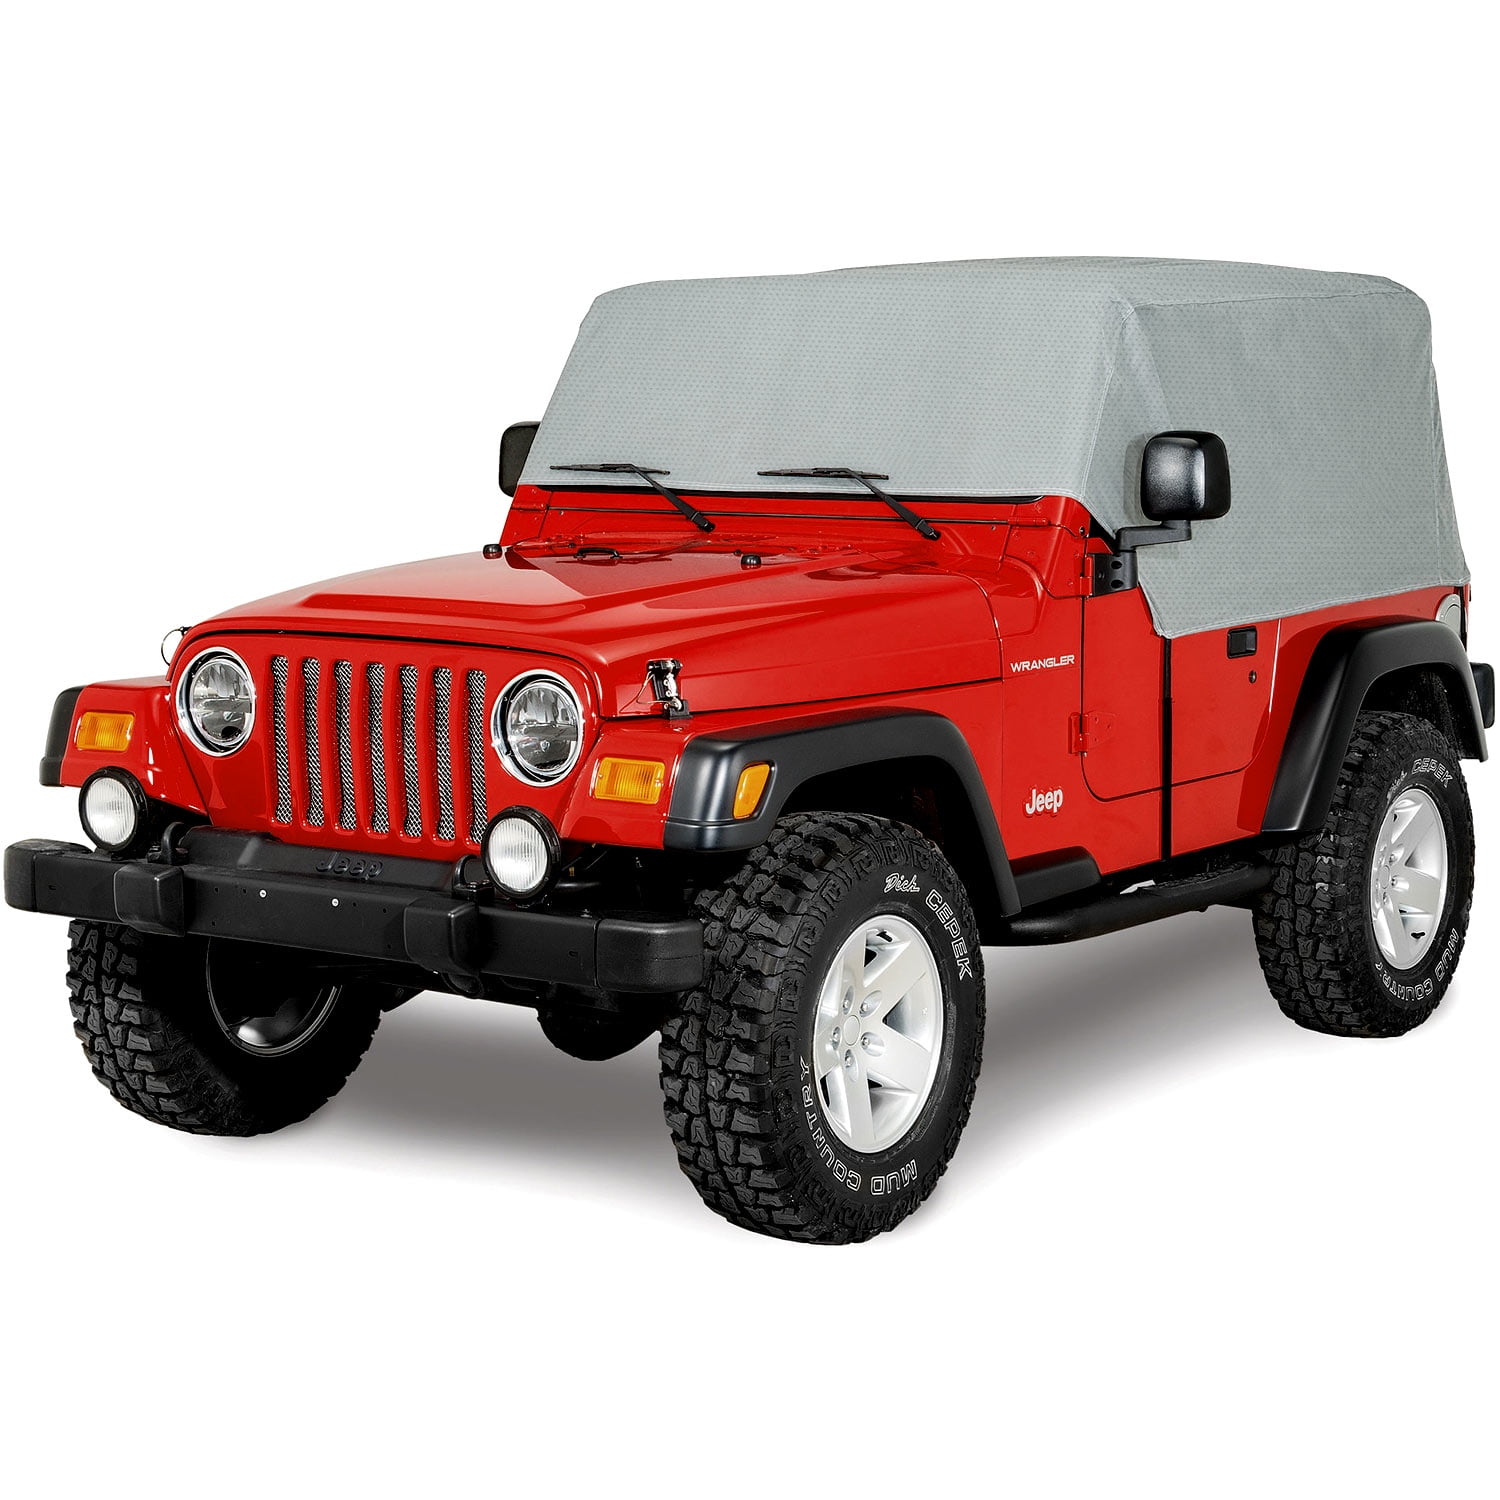 North East Harbor 4-Layer Breathable Cab Car Cover Compatible with 1976-2006  Jeep Wrangler - Breathable Material, Sunray Protected, and Weather  Resistant Storage Cover, Grey | Walmart Canada